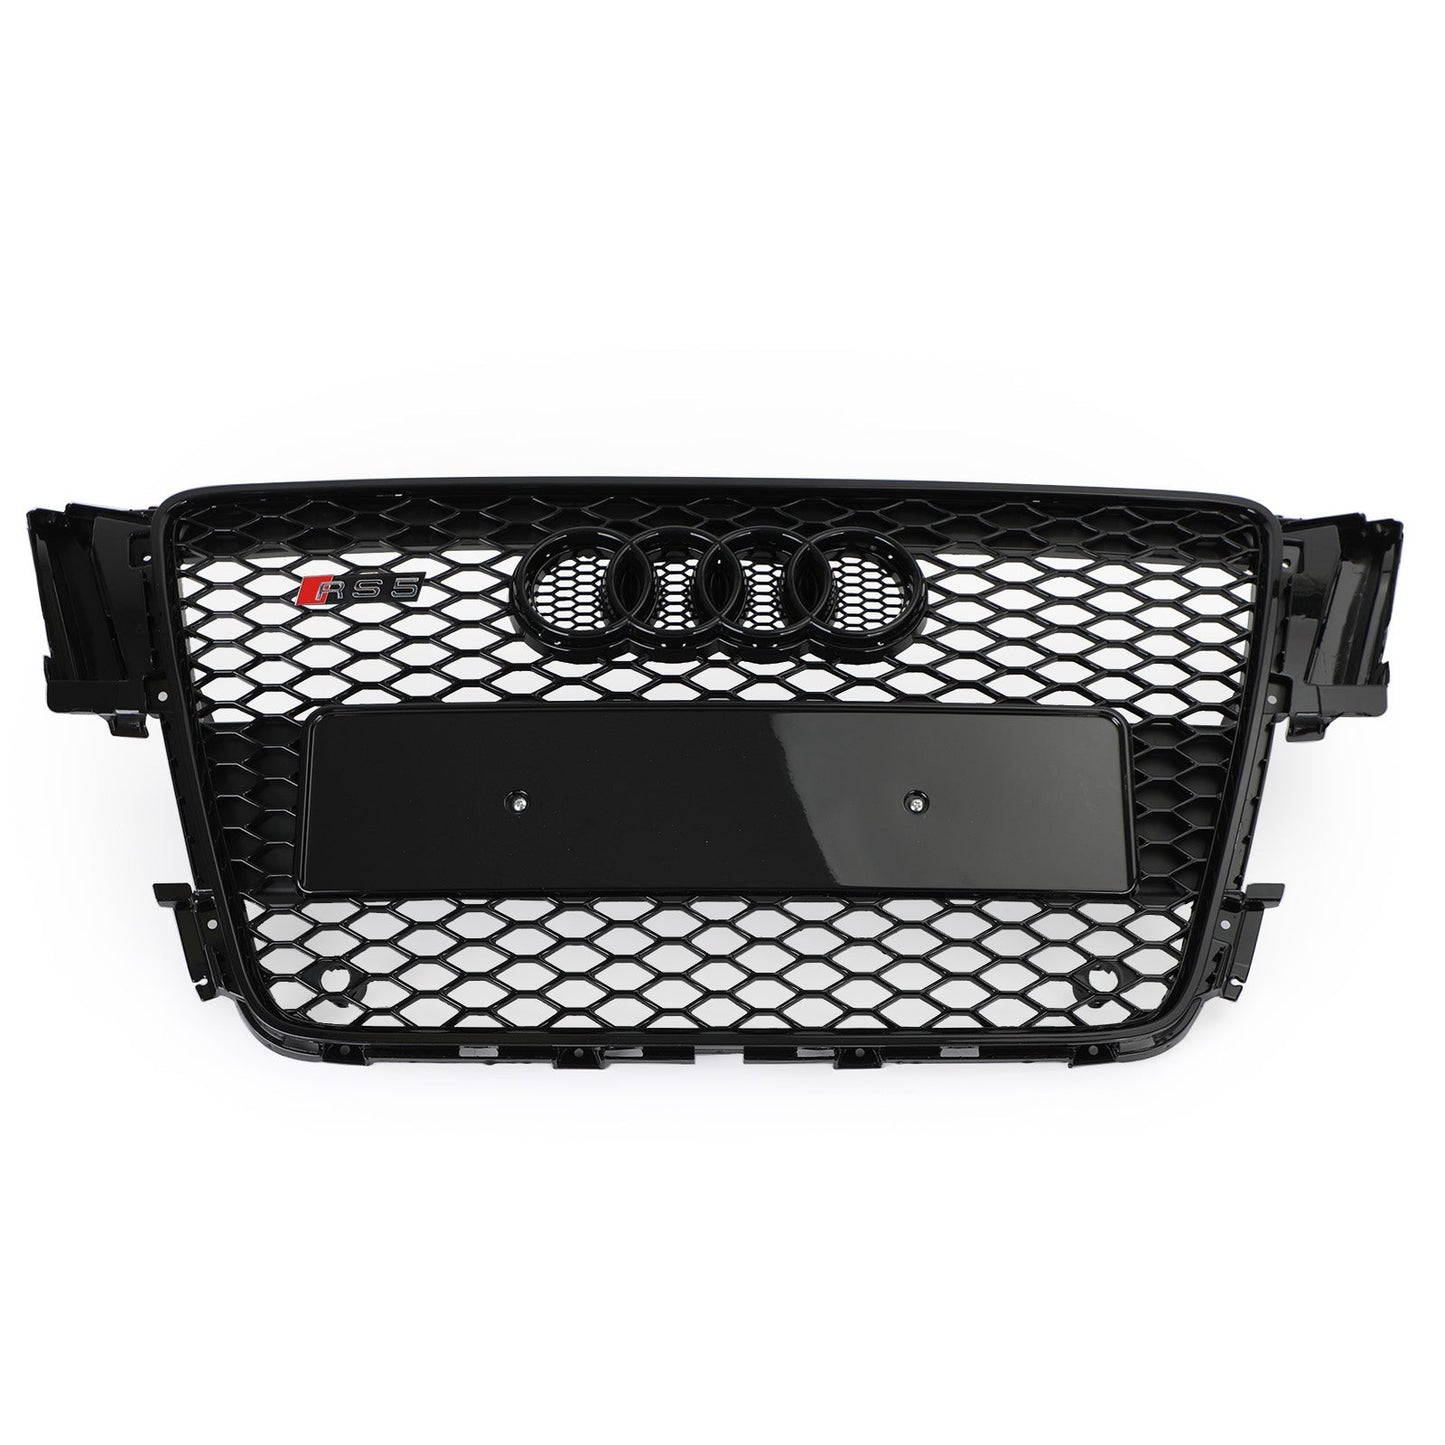 2008-2012 AUDI A5 S5 B8 RS5 Style Hood Henycomb Sport mesh Grille Grill